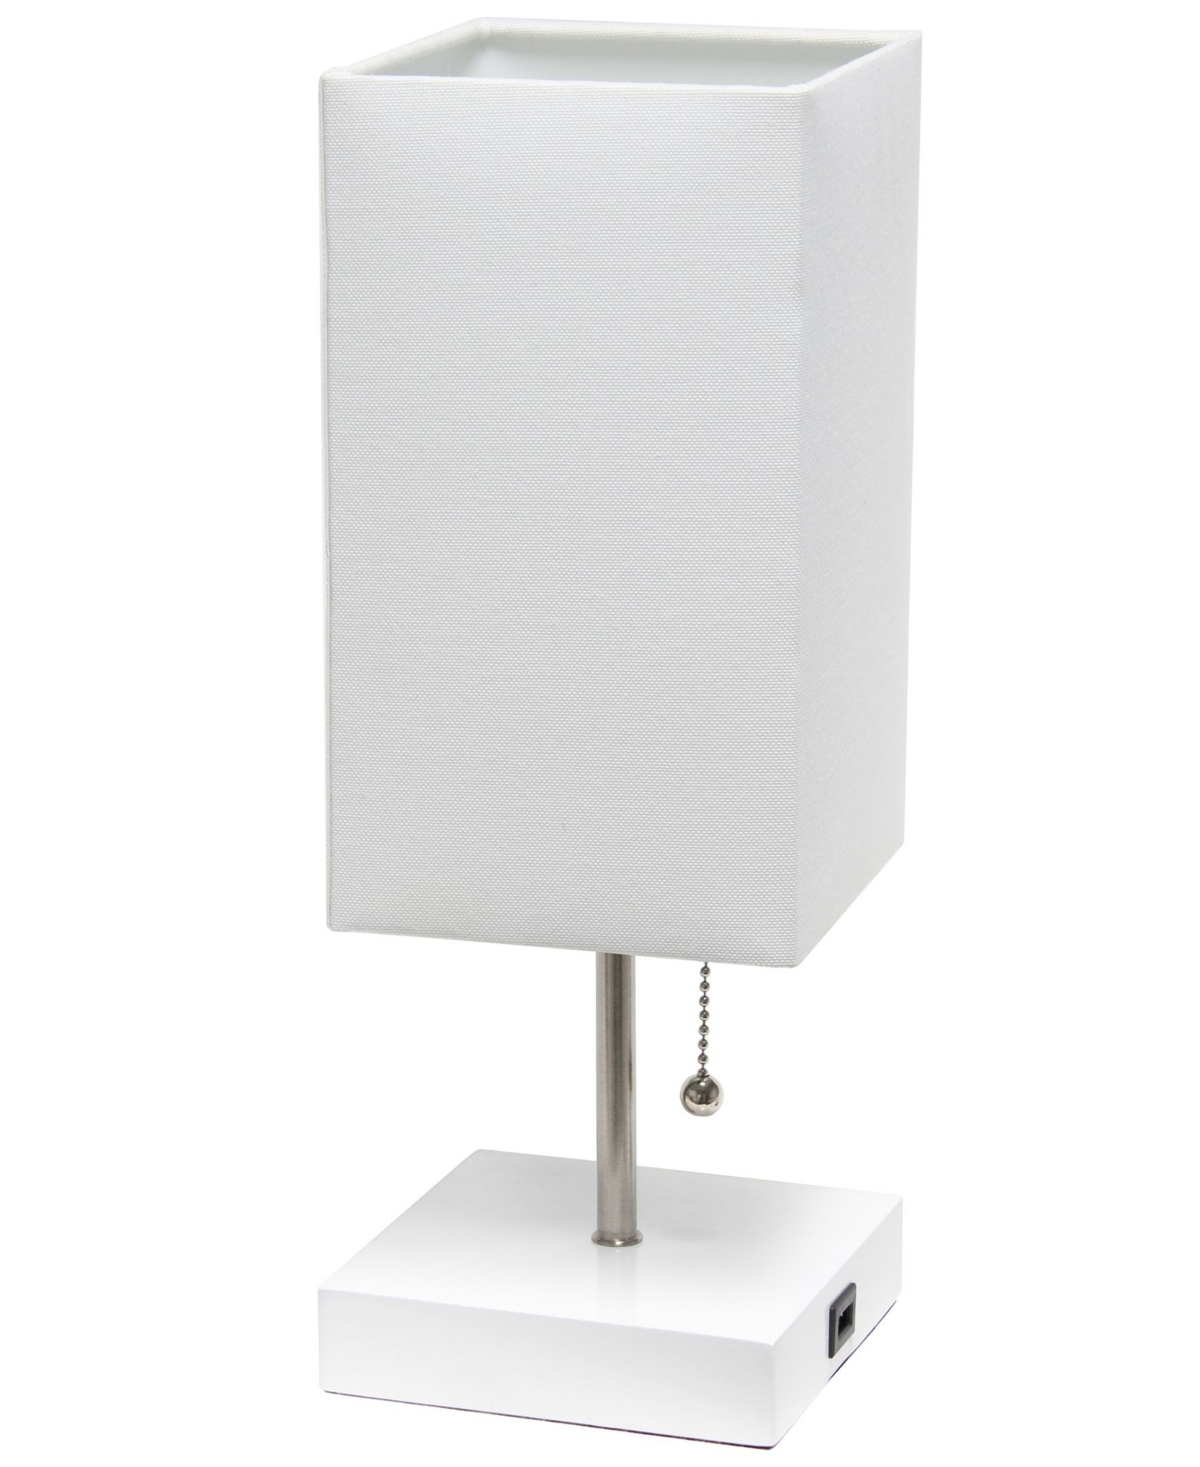 Simple Designs Petite Stick Lamp With Usb Charging Port And Shade In White Shade,white Base